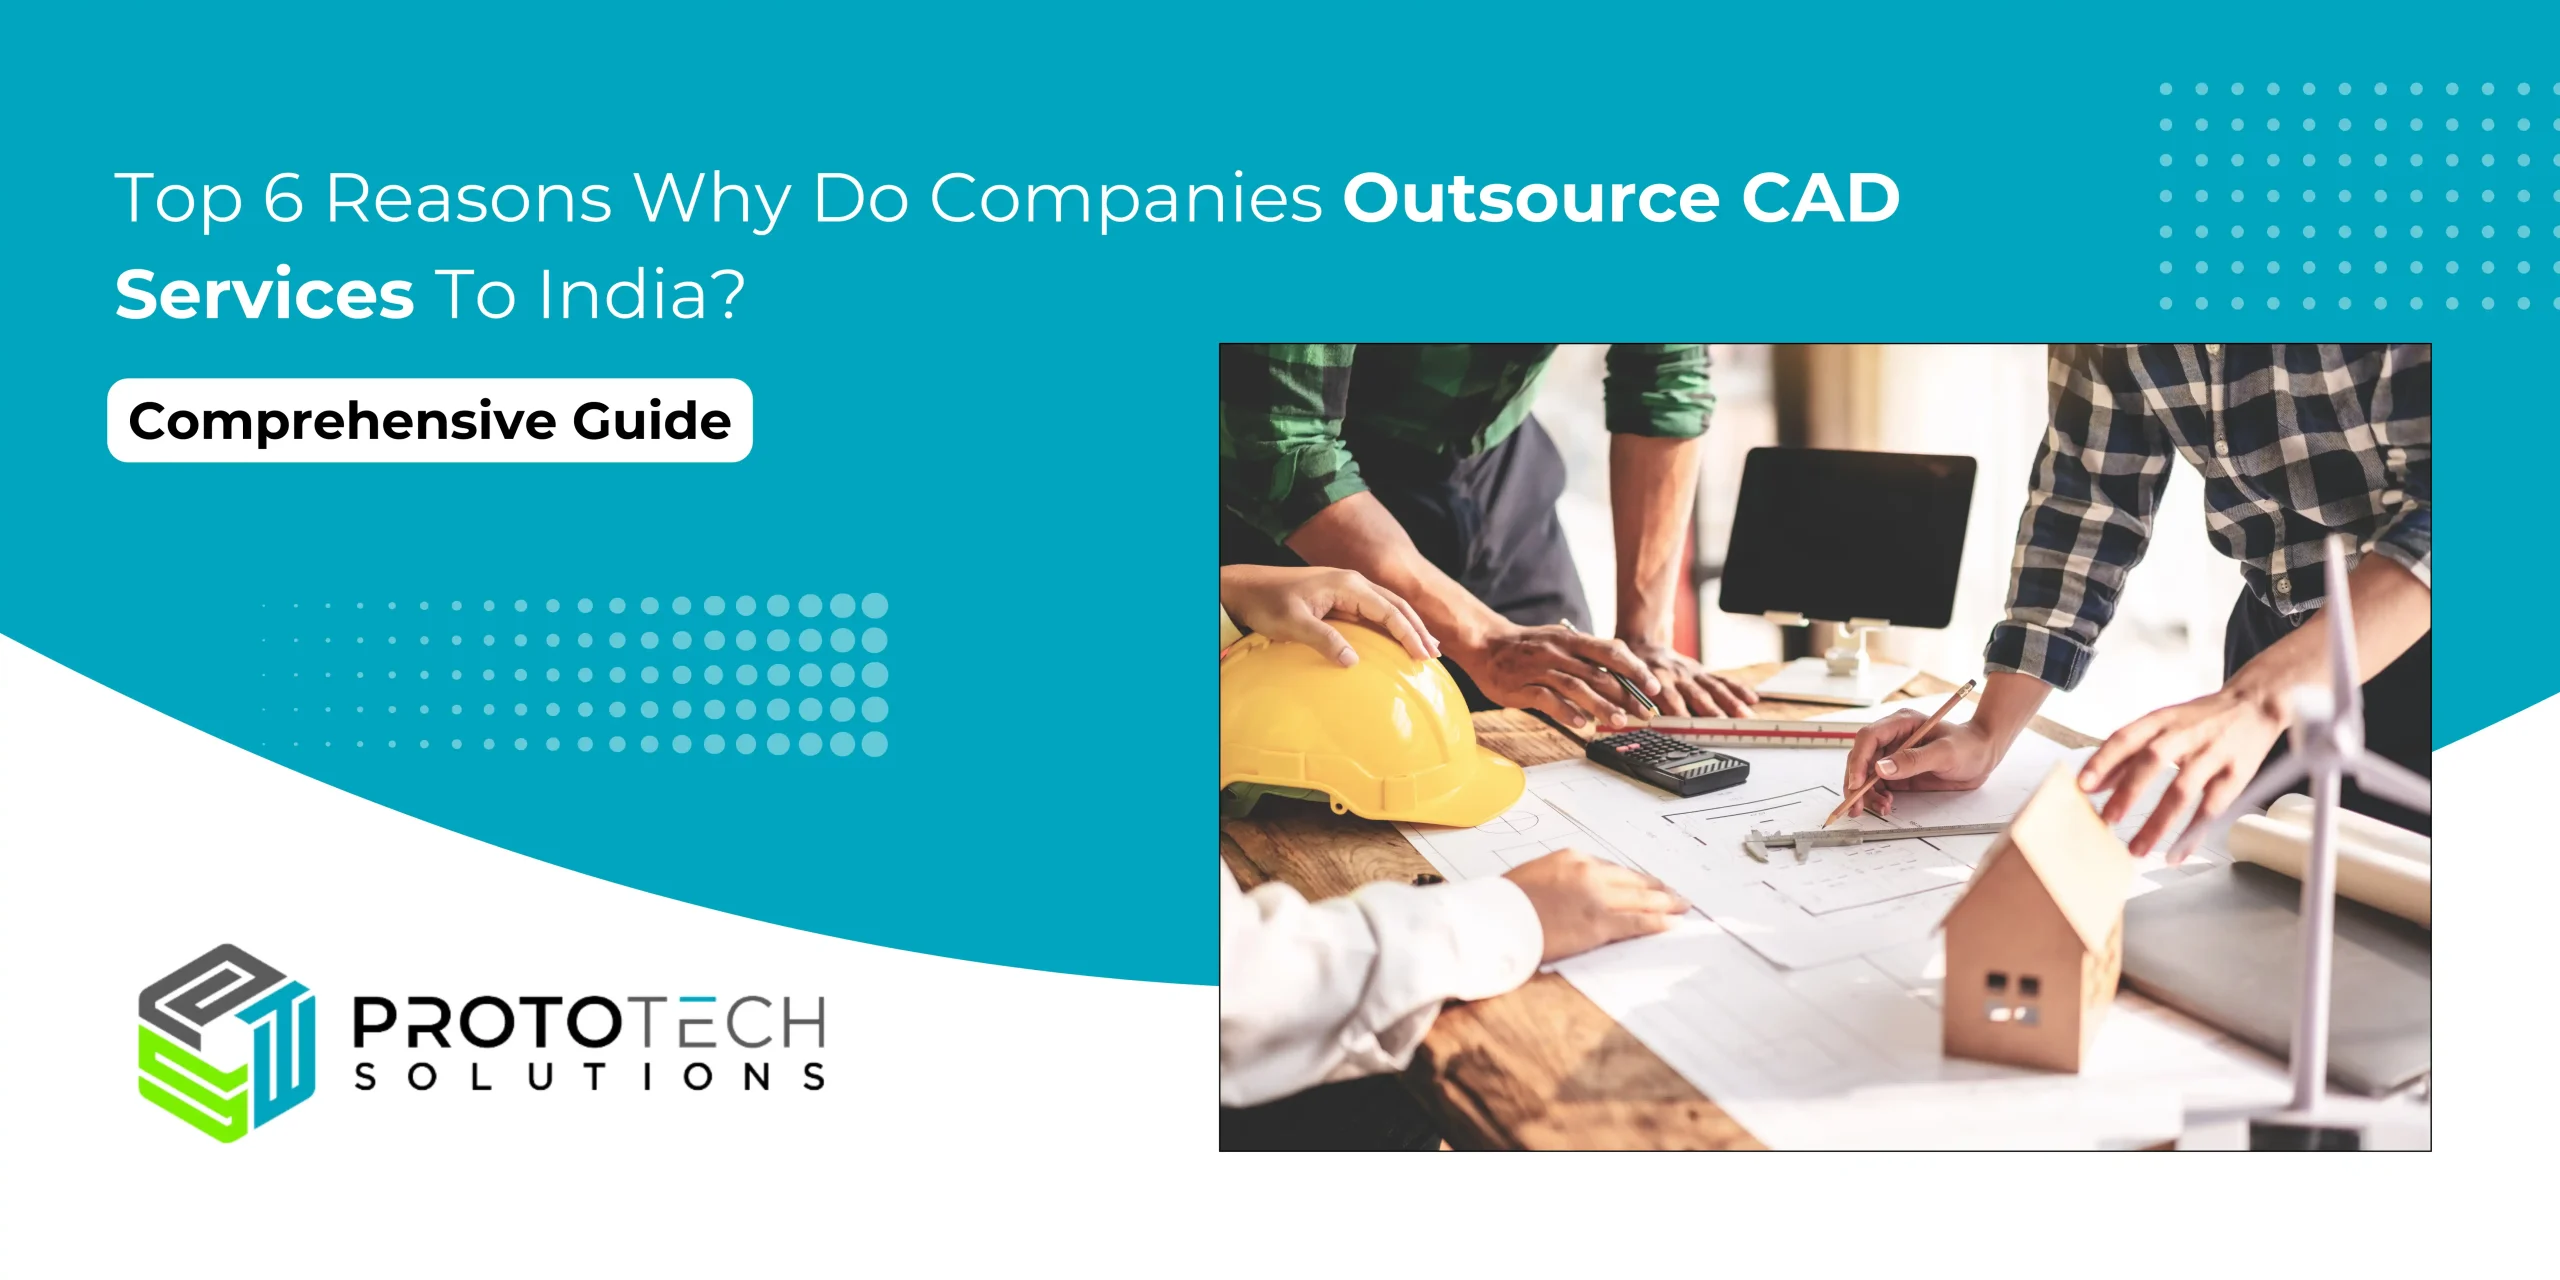 Top 6 Reasons Why Do Companies Outsource CAD Services To India